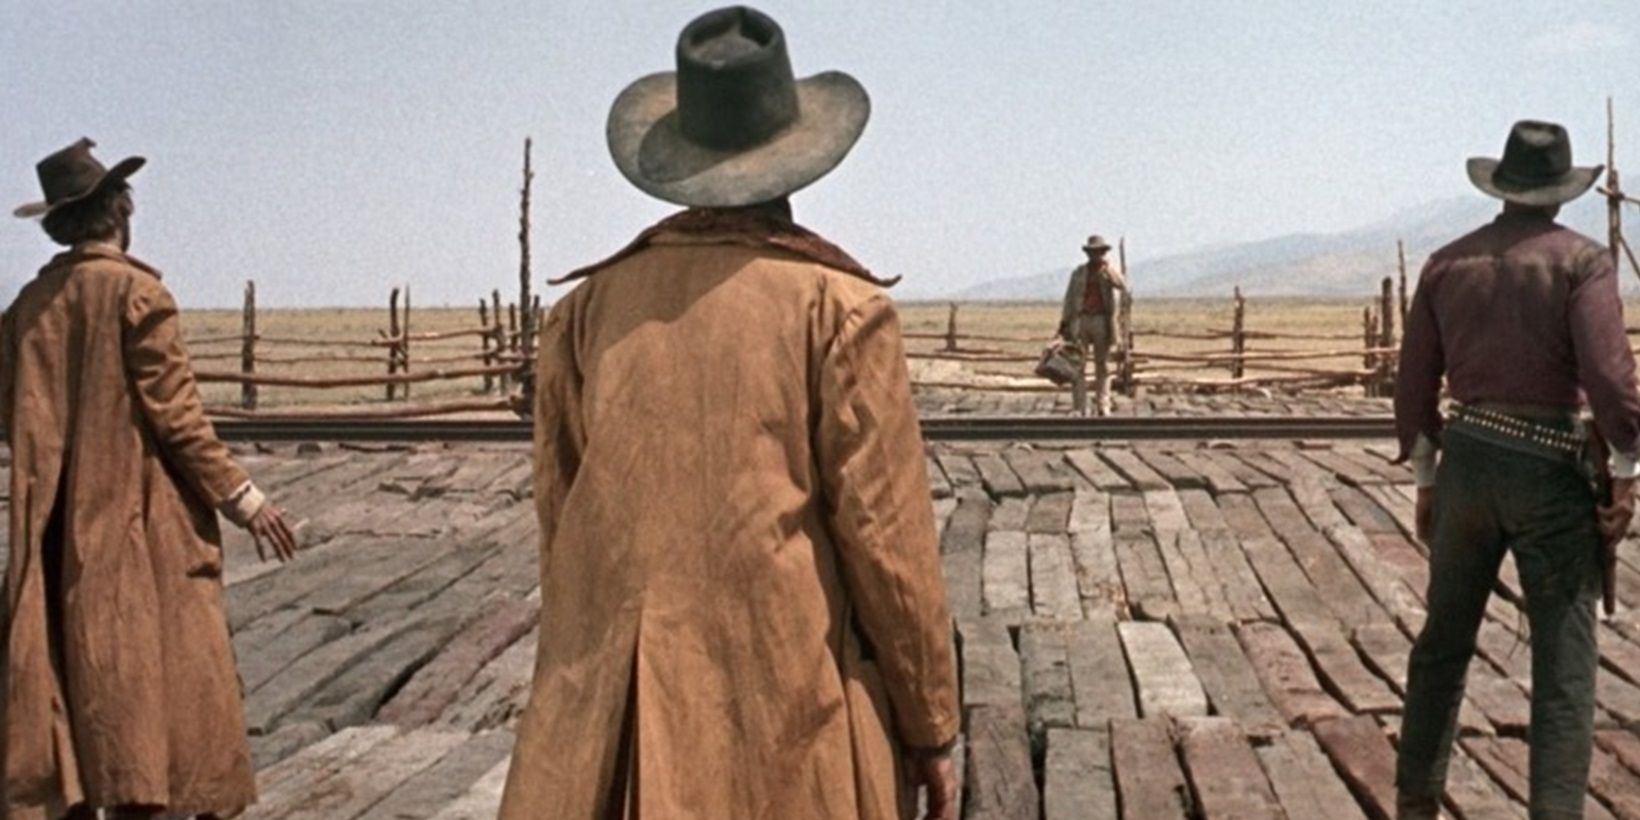 Three gunslingers wait for Charles Bronson in Once Upon a Time in the West